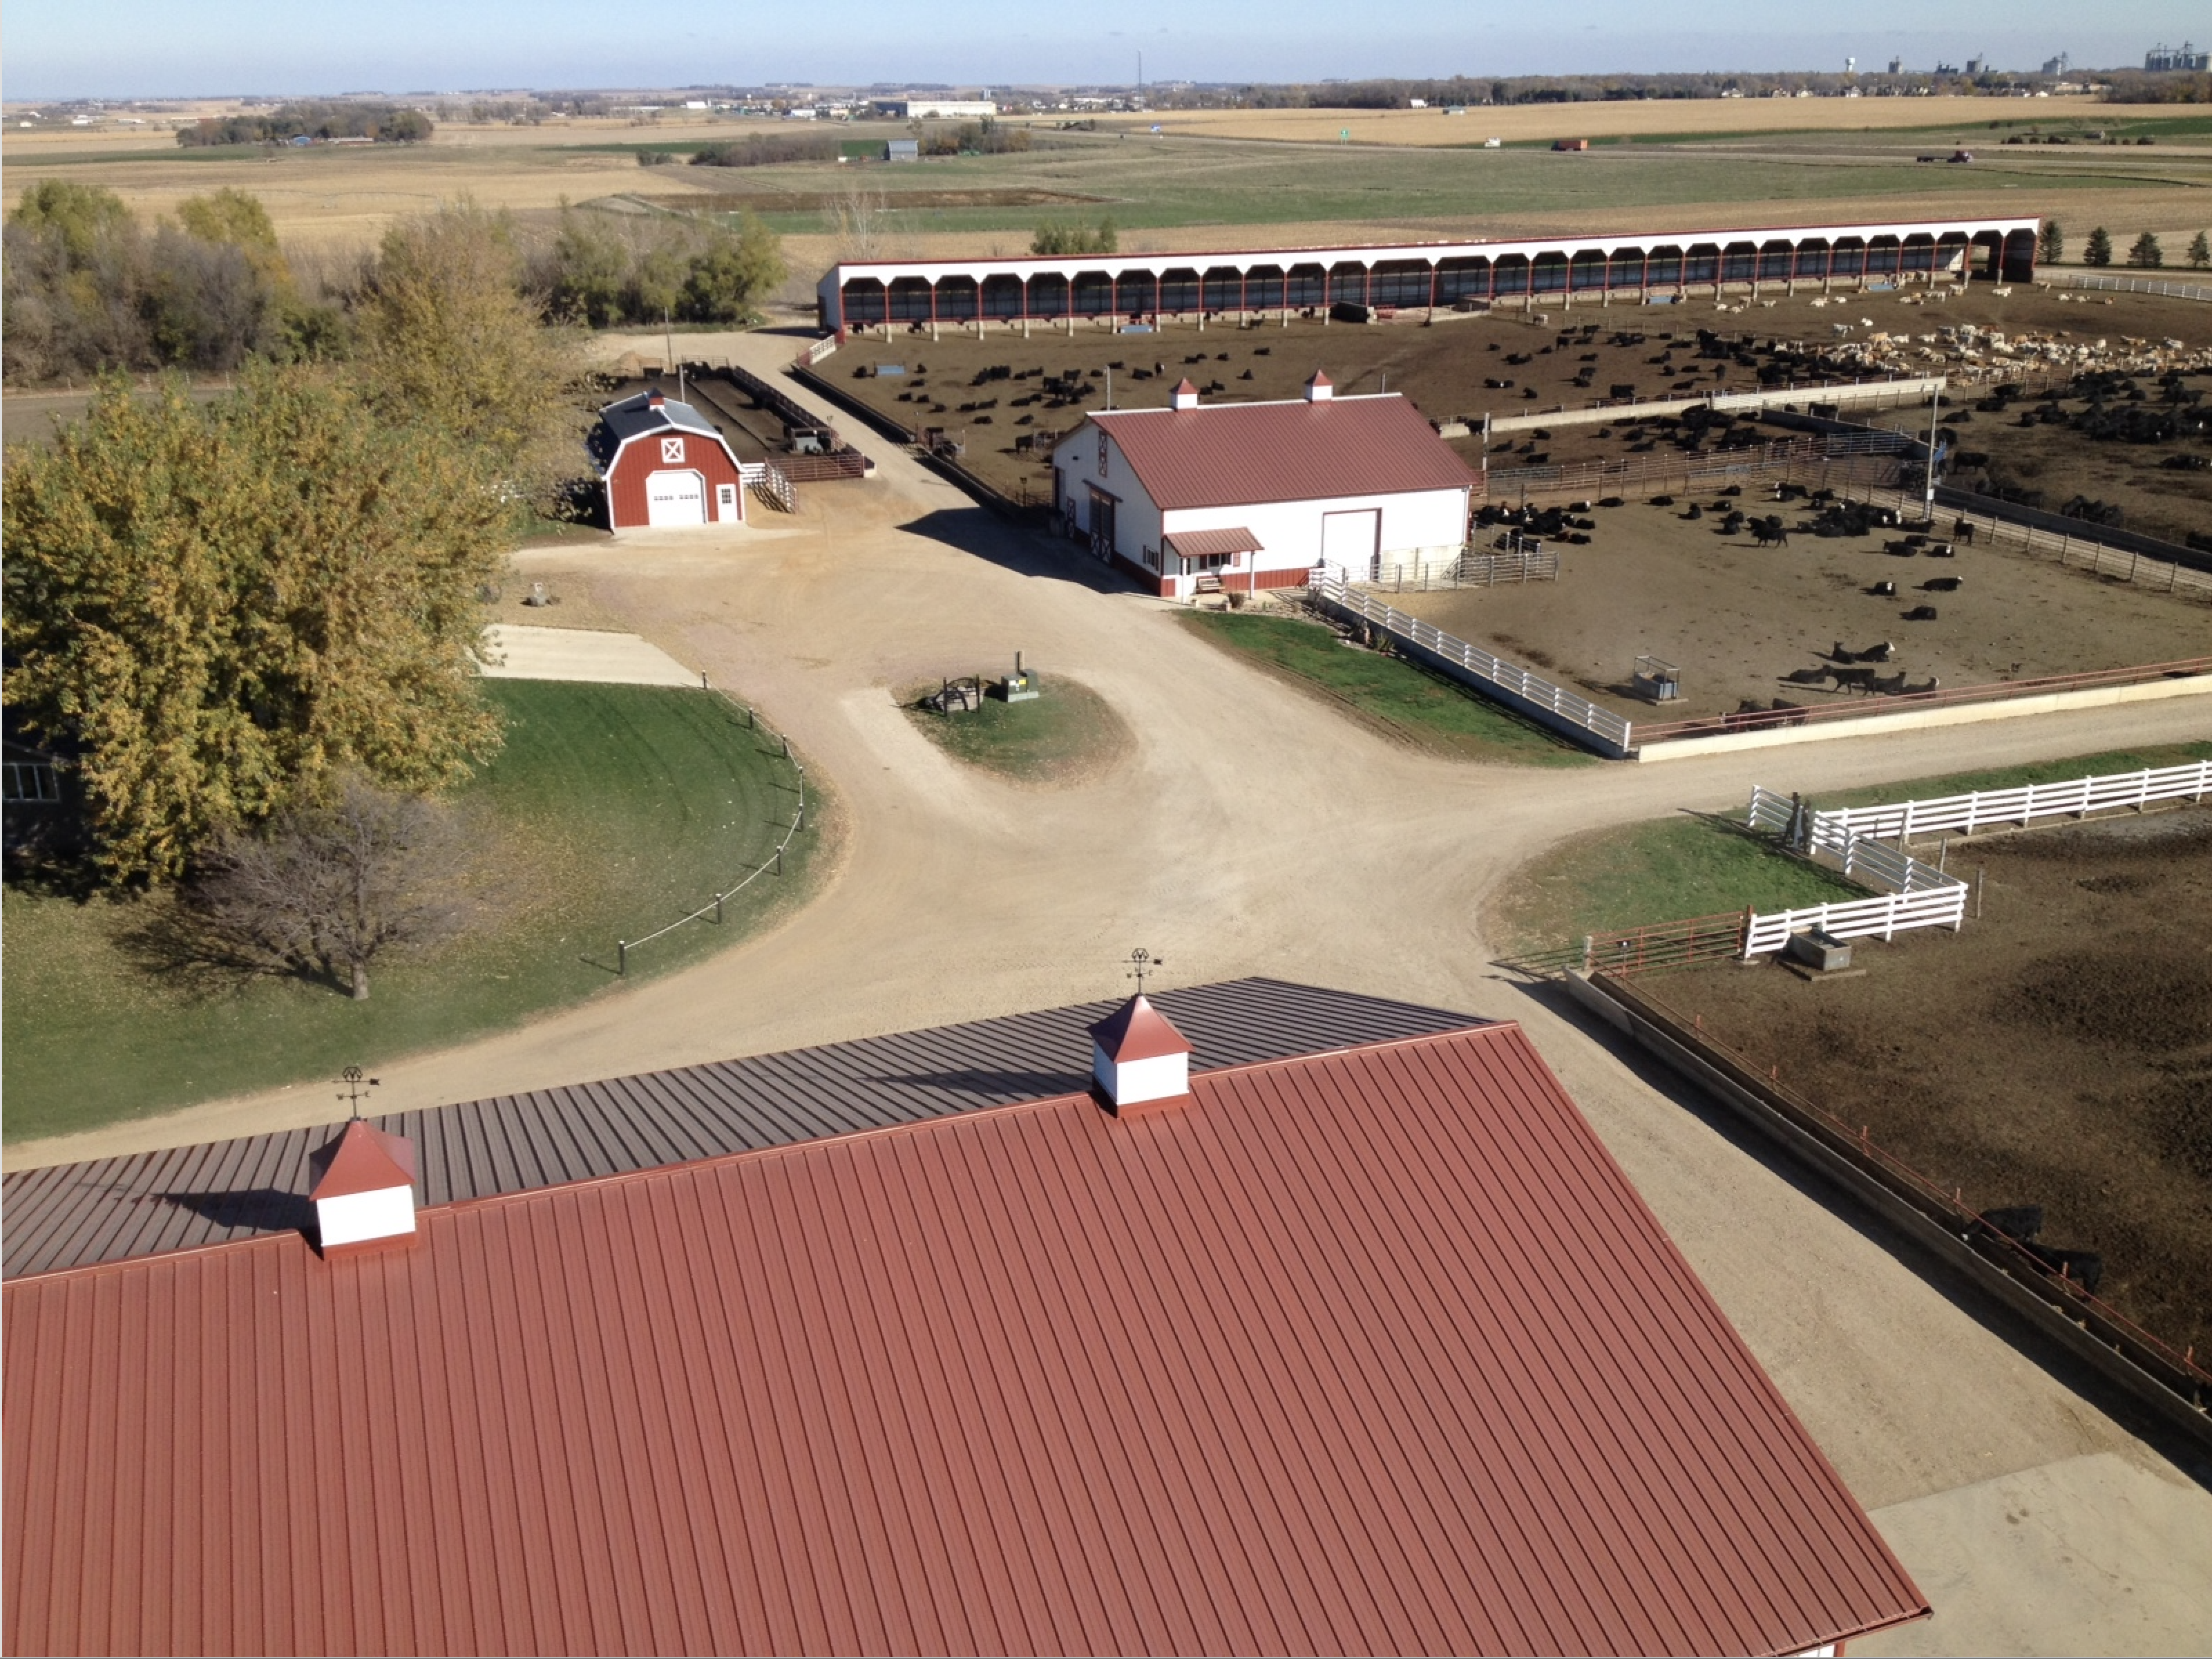 Access to Land: Christensen Farm Family & Succession Planning